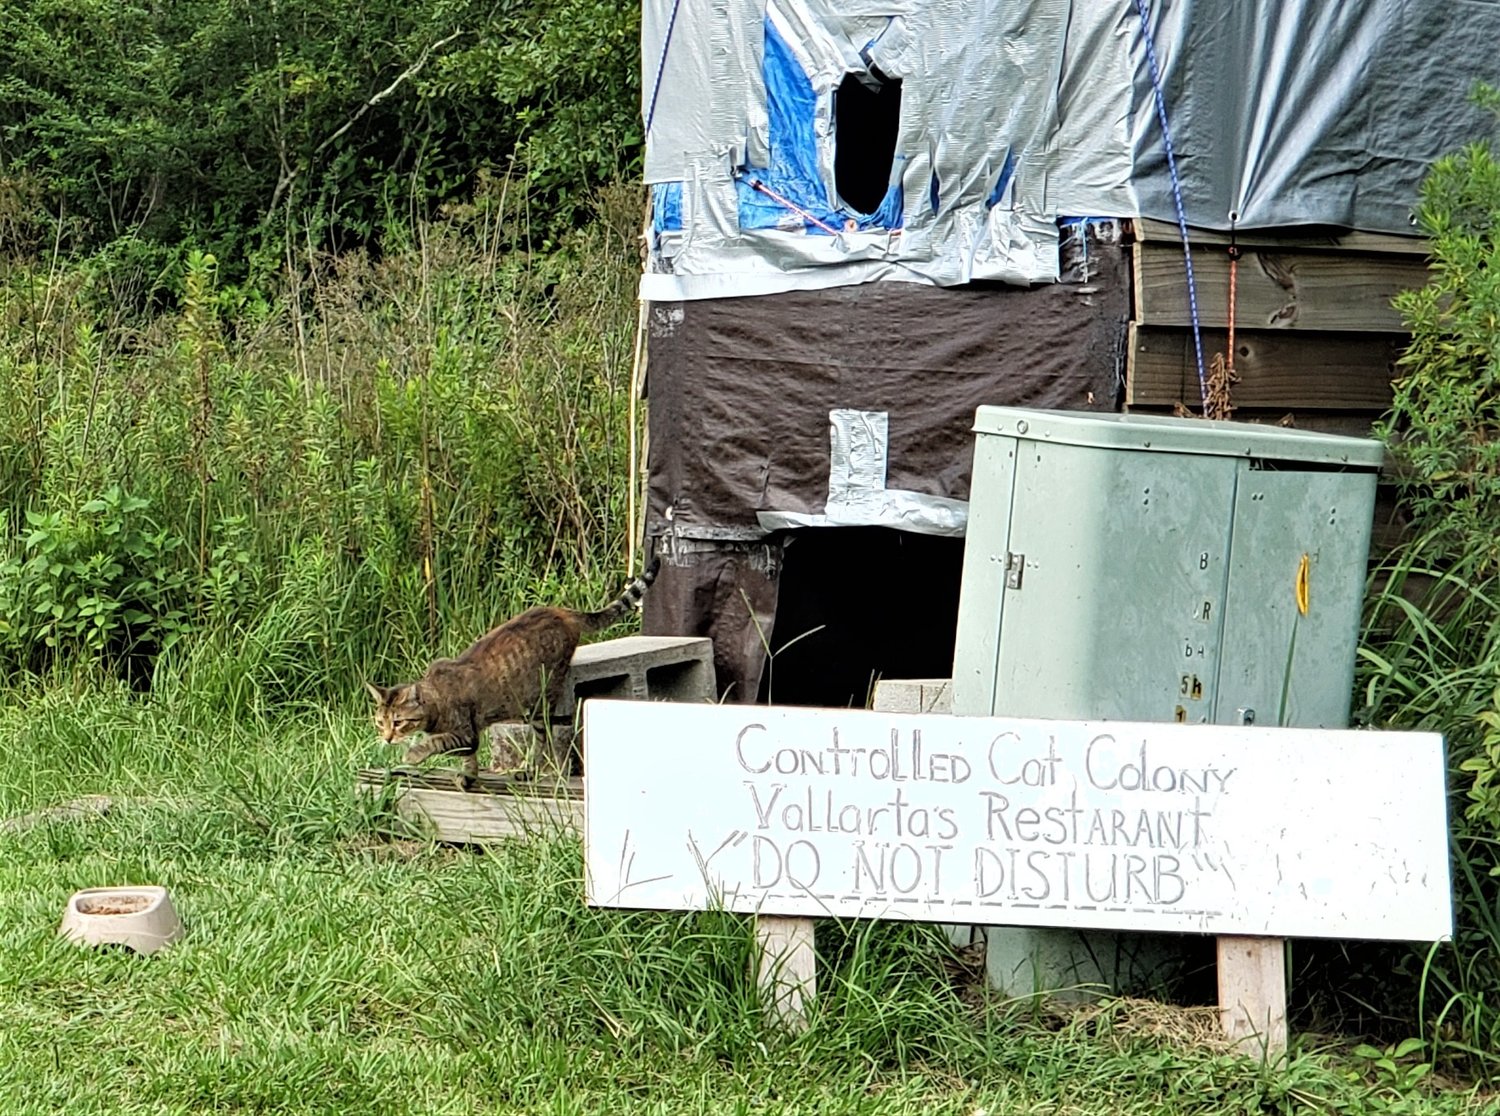 Many cat colonies can be found around Foley and in area neighborhoods, but until now there was no organized effort to help with a solution.